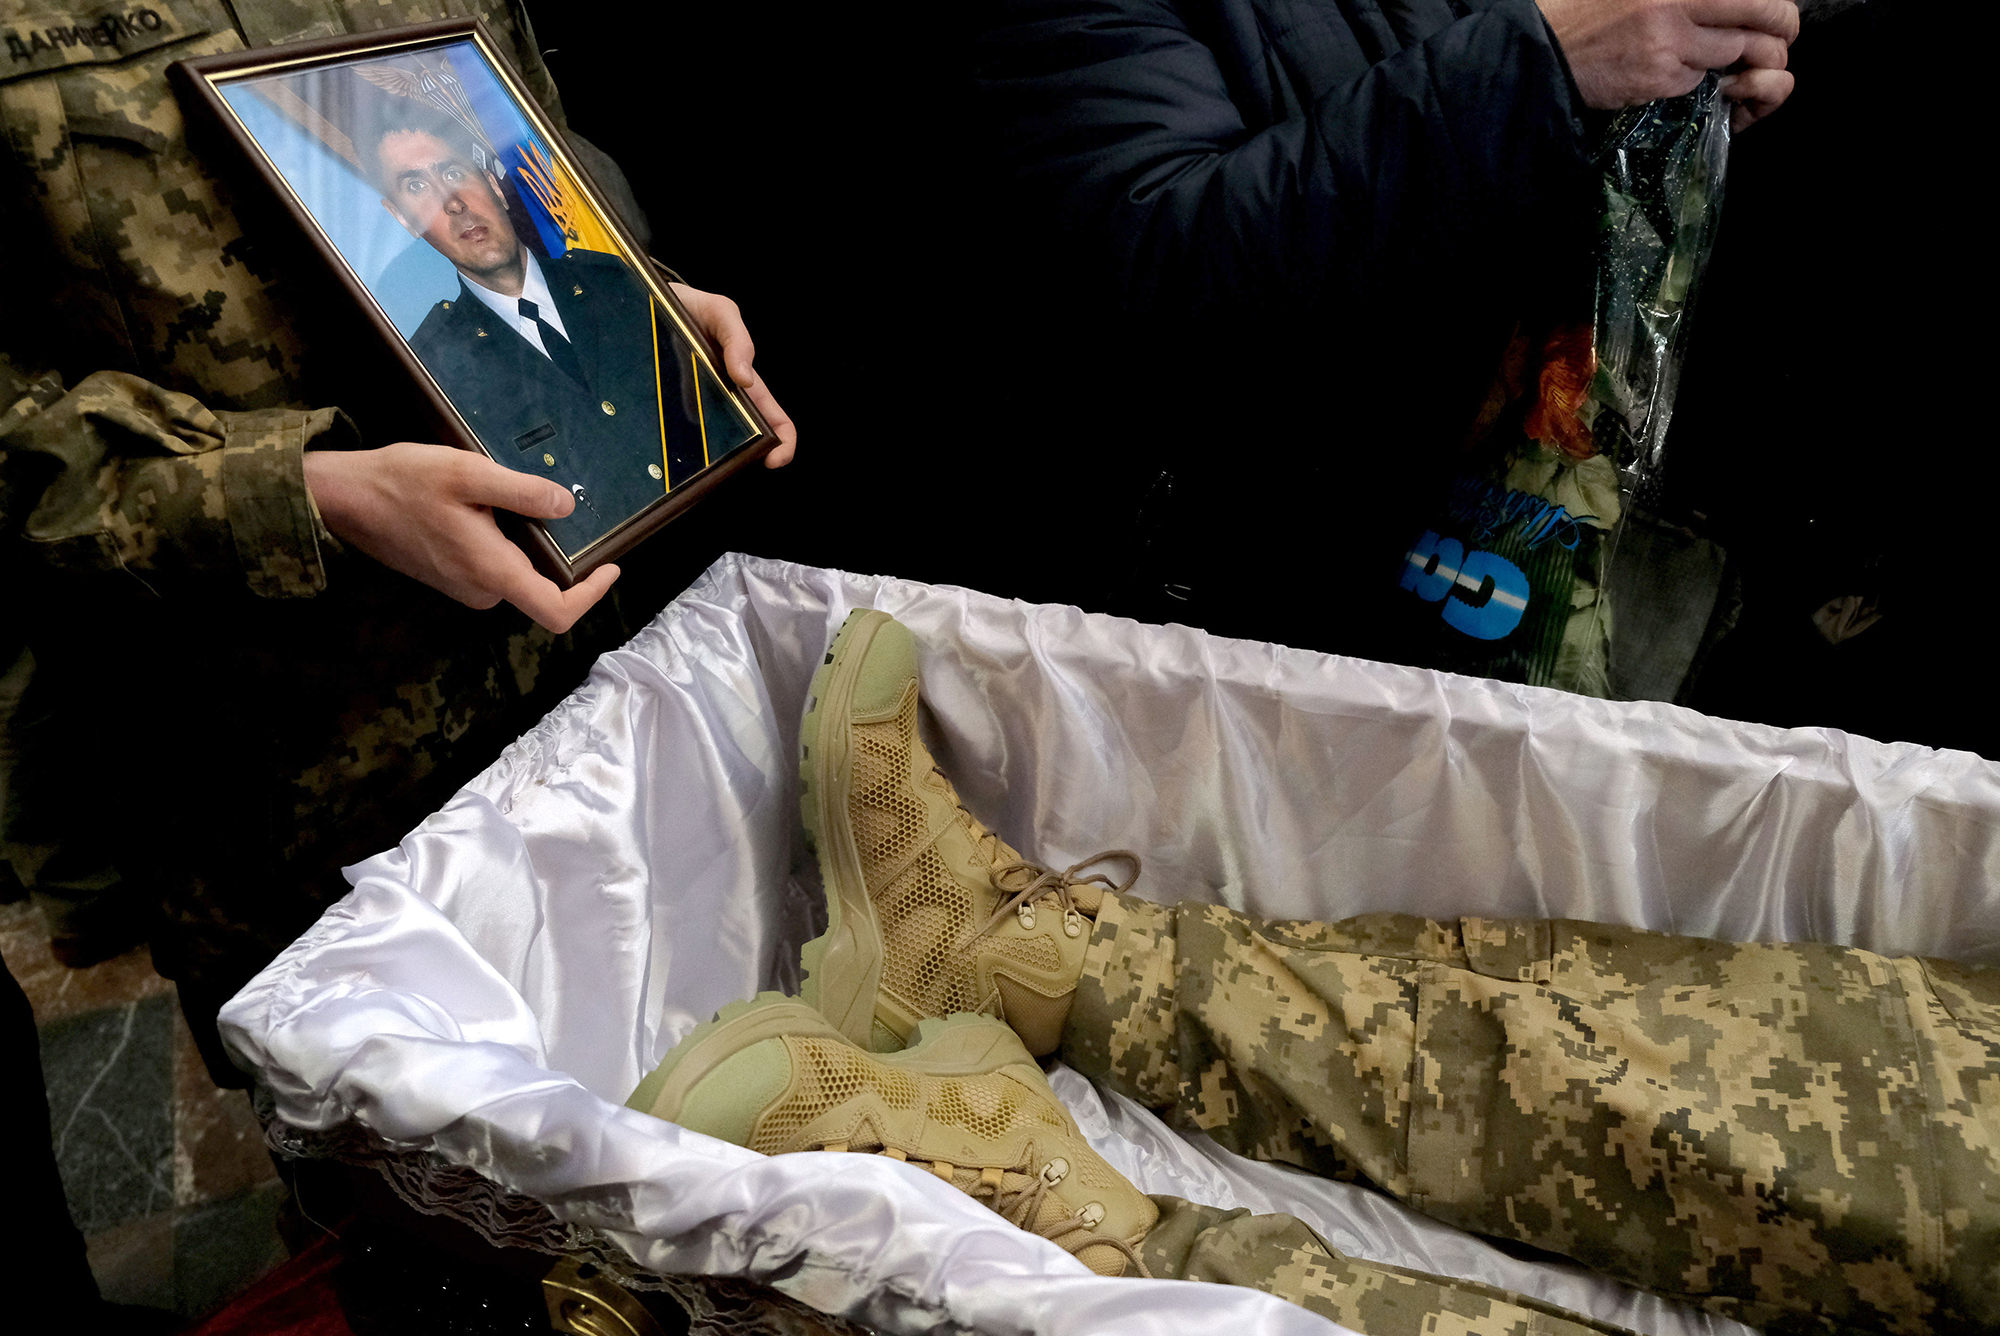 Senior Soldier Andrii Stefanyshyn, 39, Senior Lieutenant Taras Didukh, 25, and Sergeant Dmytro Kabakov, 58, were laid to rest in a service at the Saints Peter and Paul Garrysin Church in Lviv, Ukraine, on Friday, March 11.